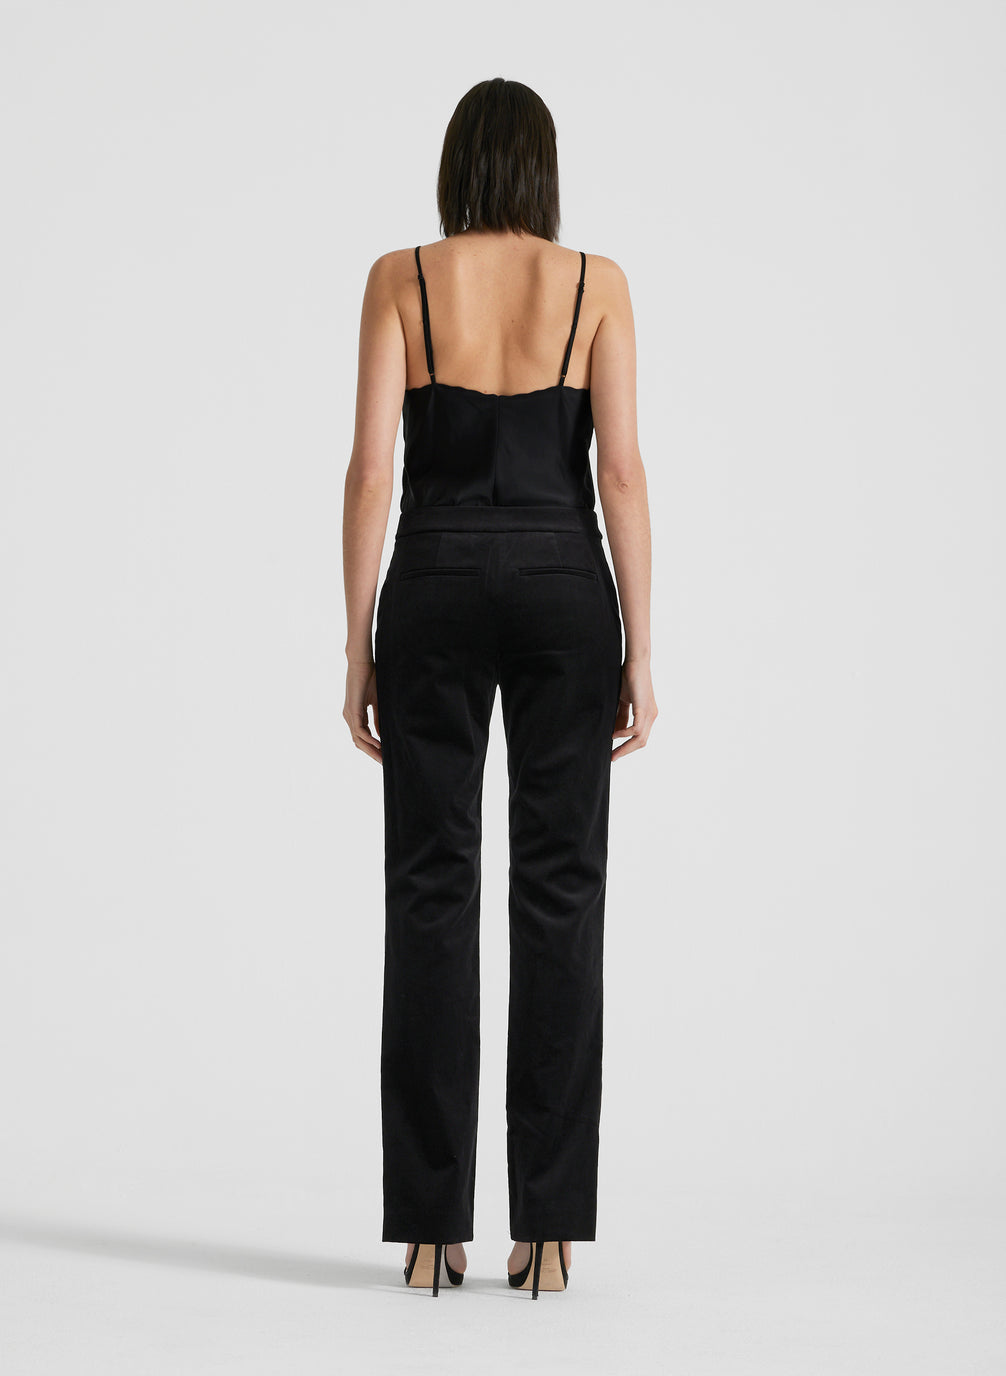 back view of woman wearing black satin camisole and black velvet pants